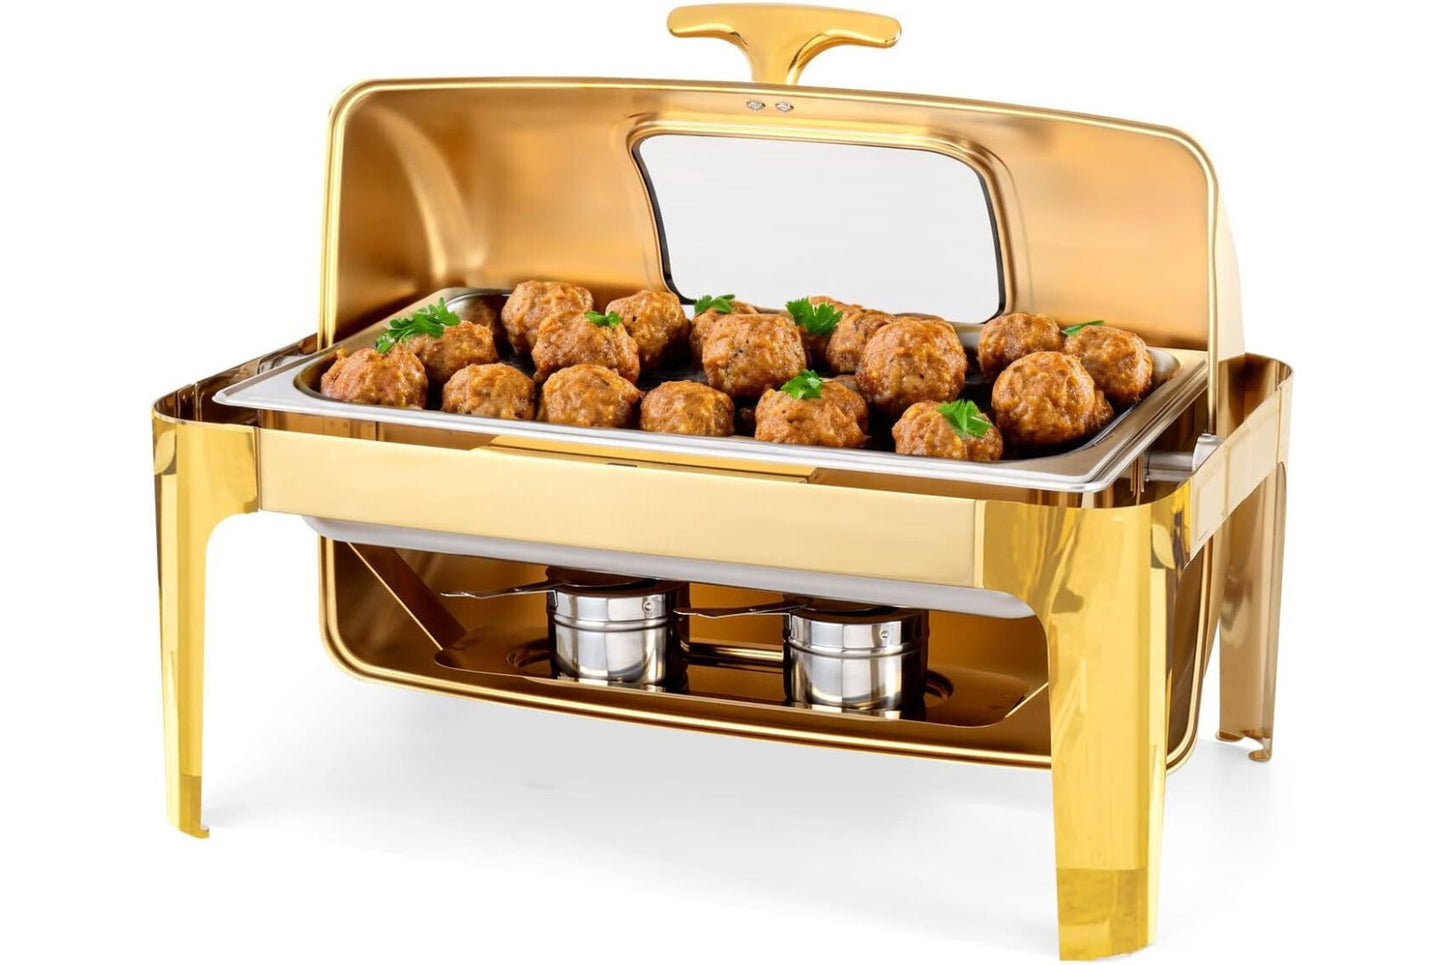 Elegant high-end gold chafing dish used to keep meatballs warm